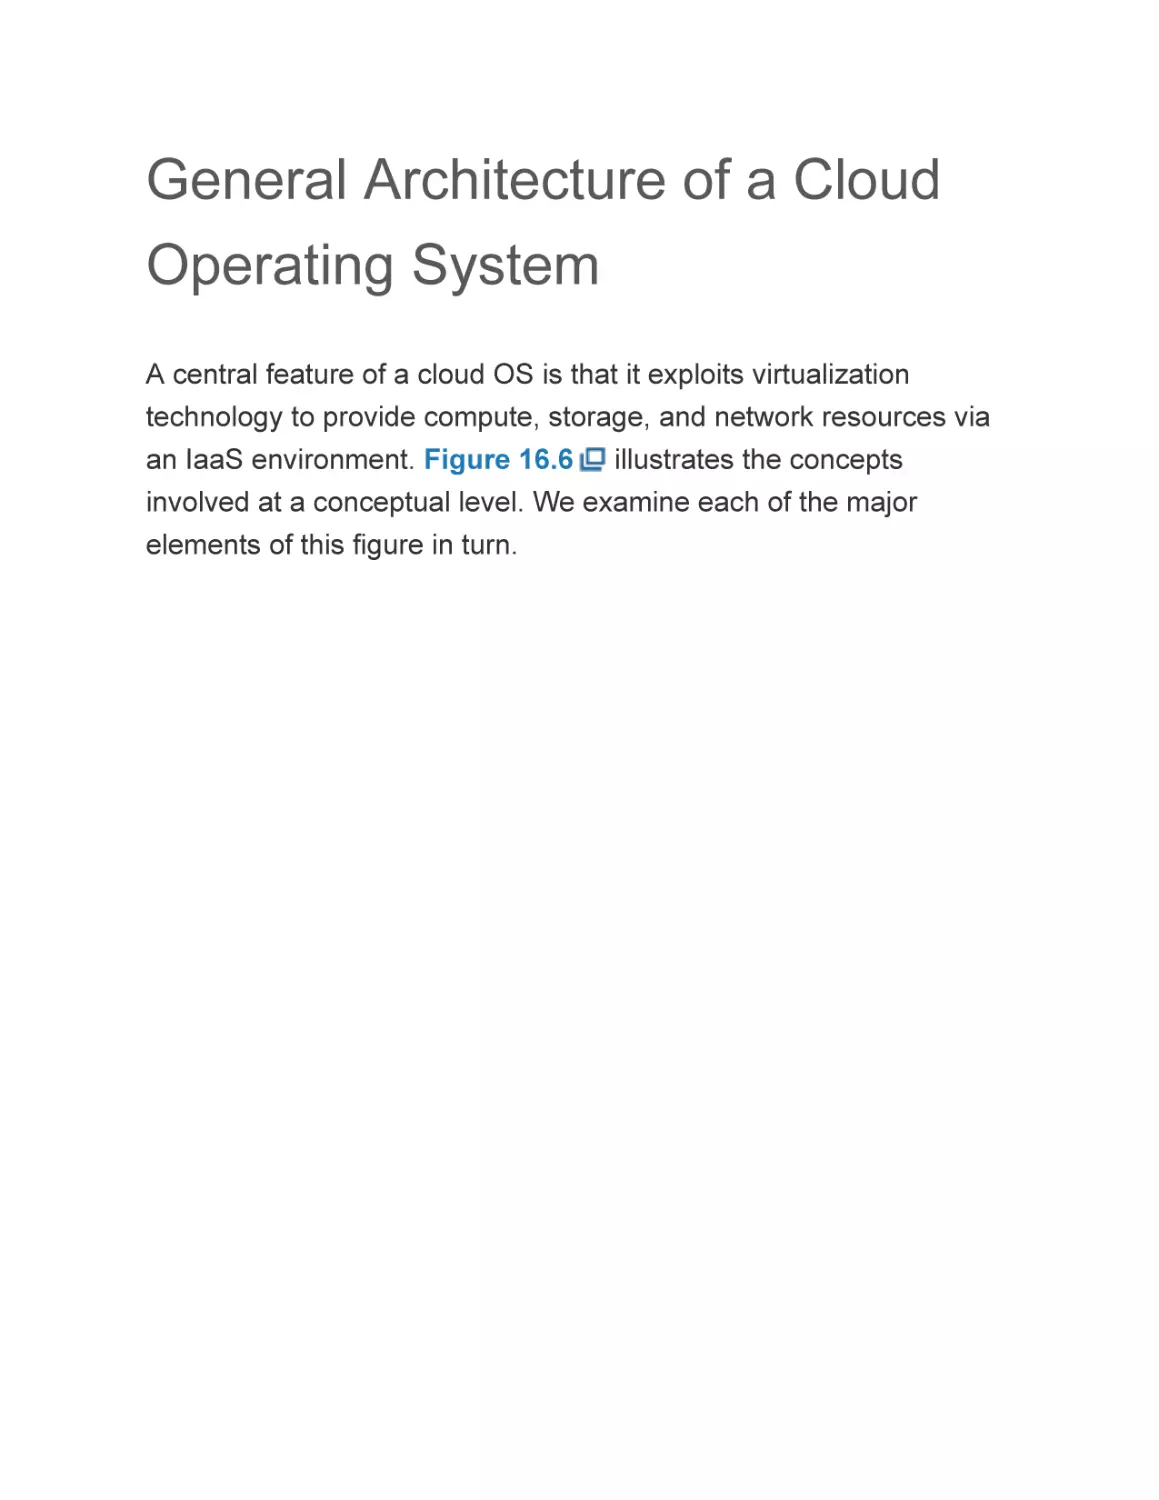 General Architecture of a Cloud Operating System